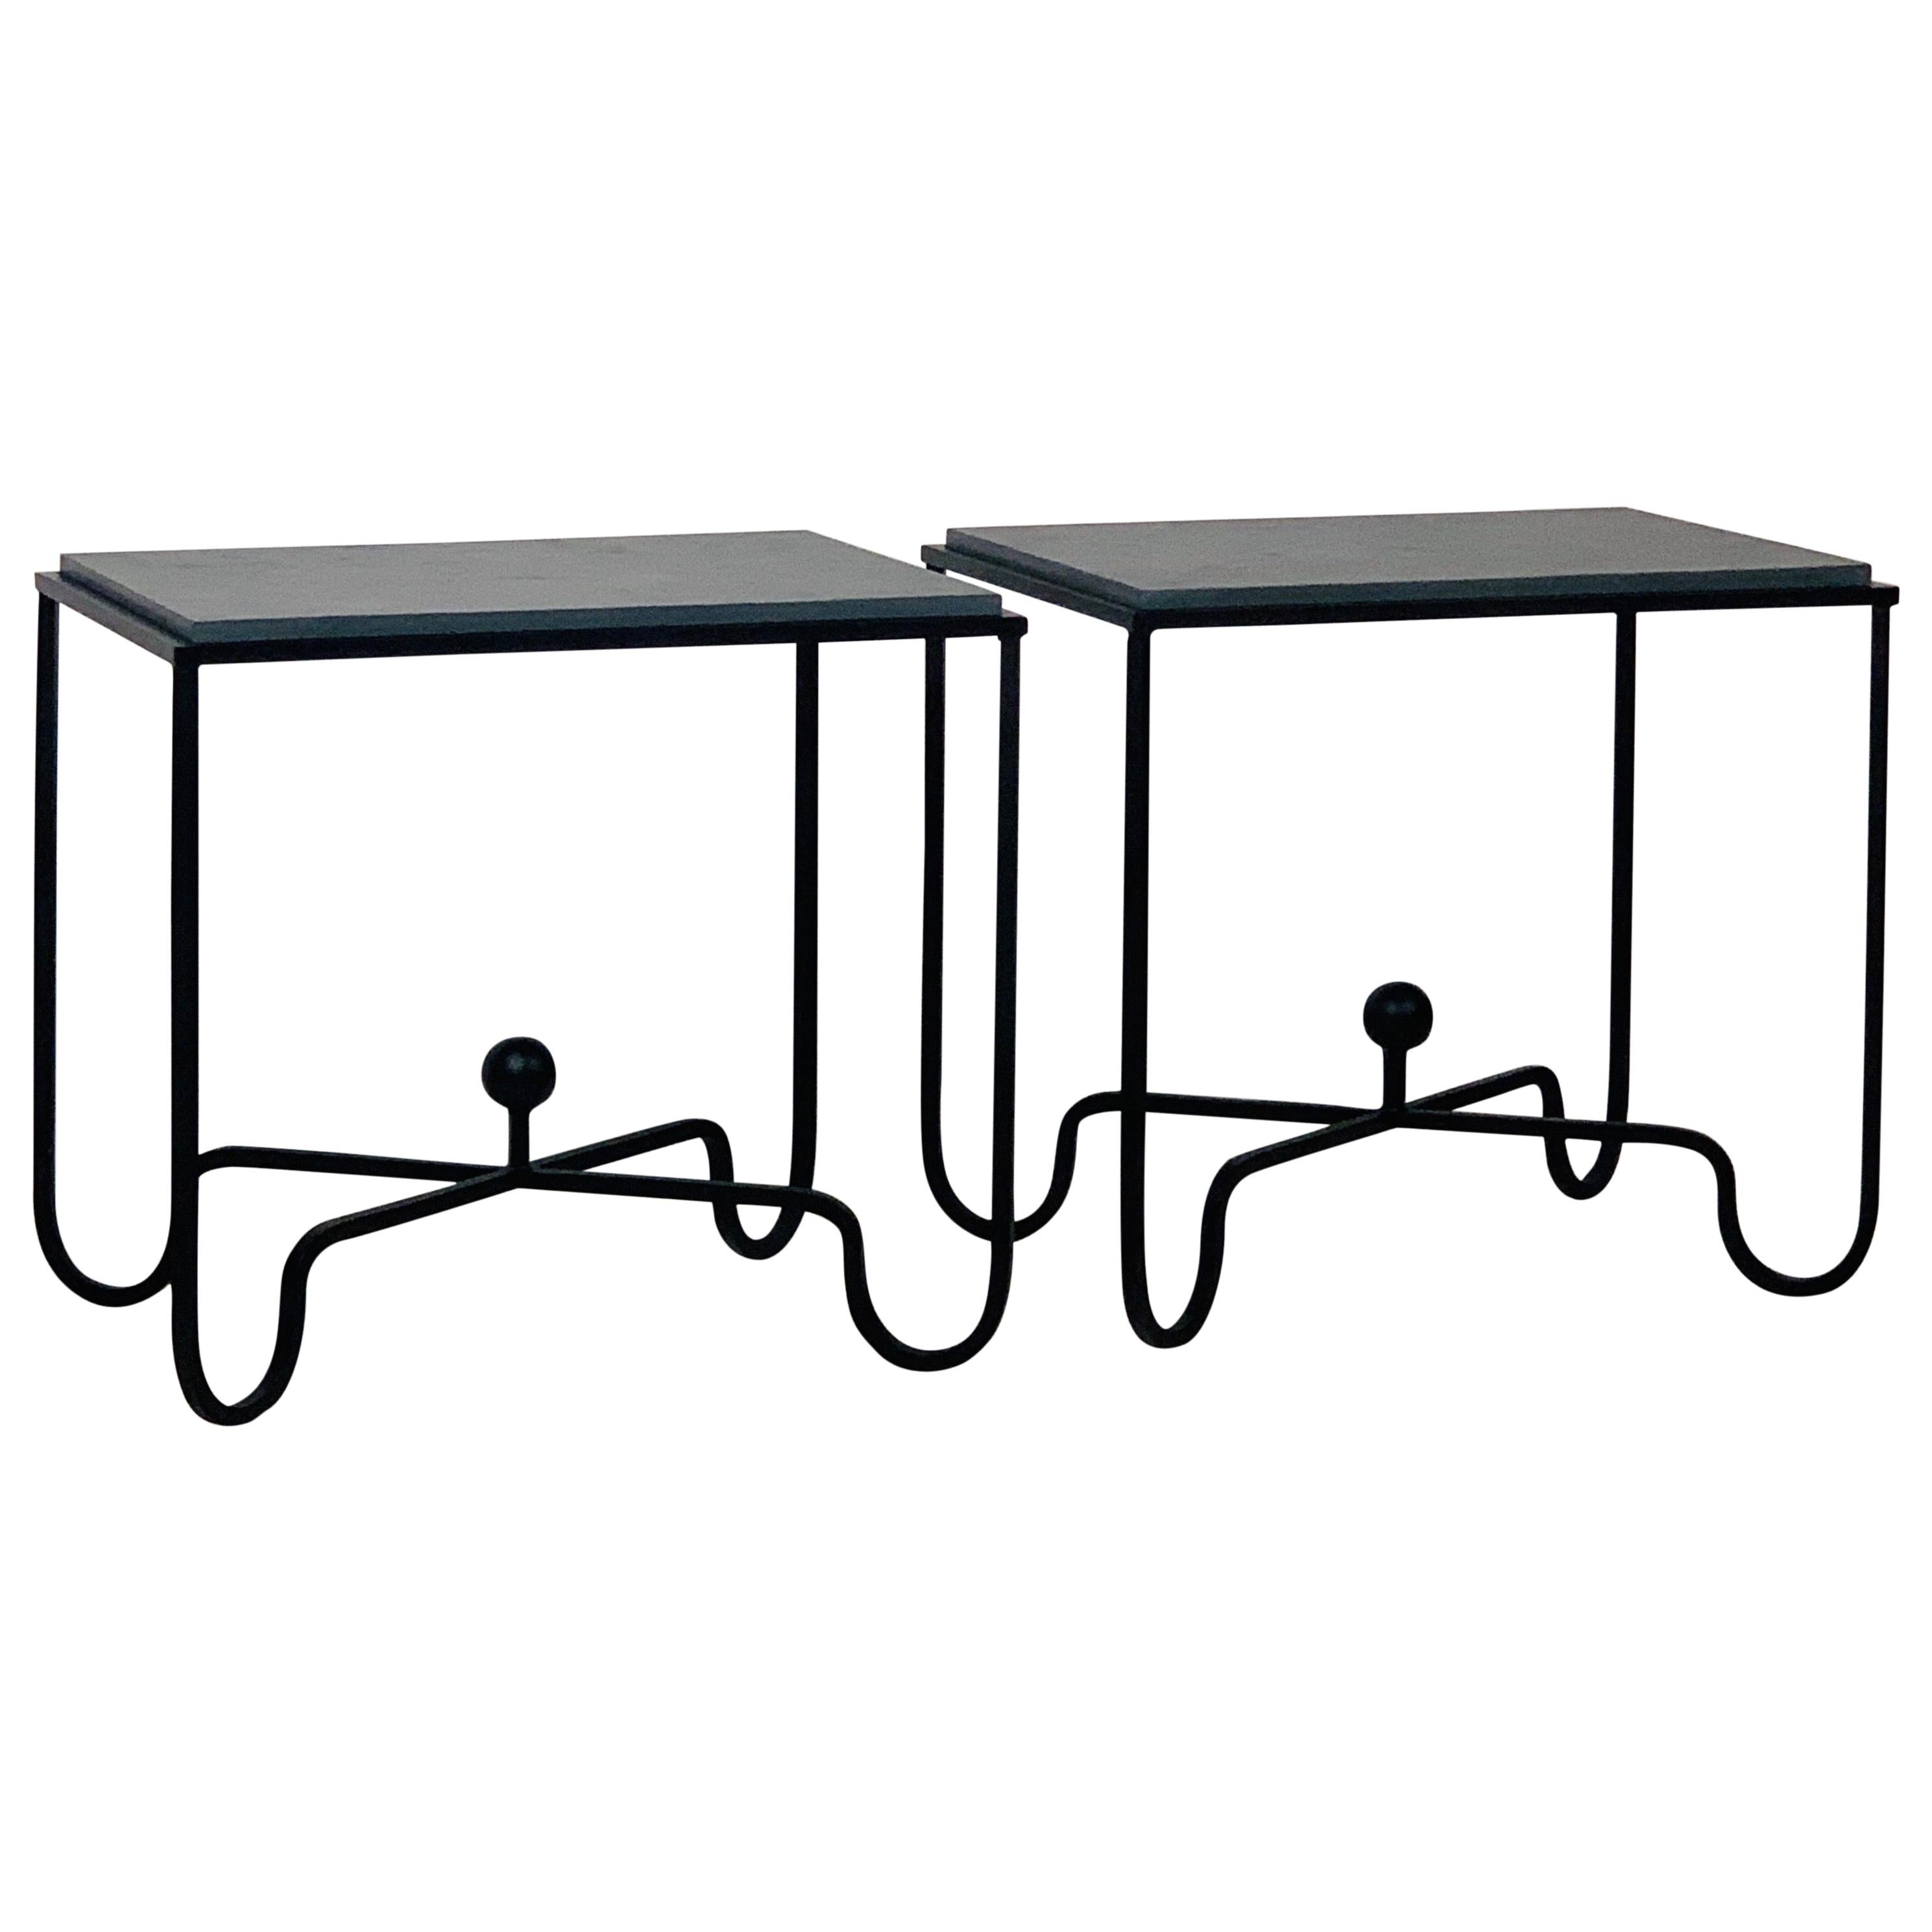 Pair of Chic Grey Slate 'Entretoise' Side Tables by Design Frères For Sale